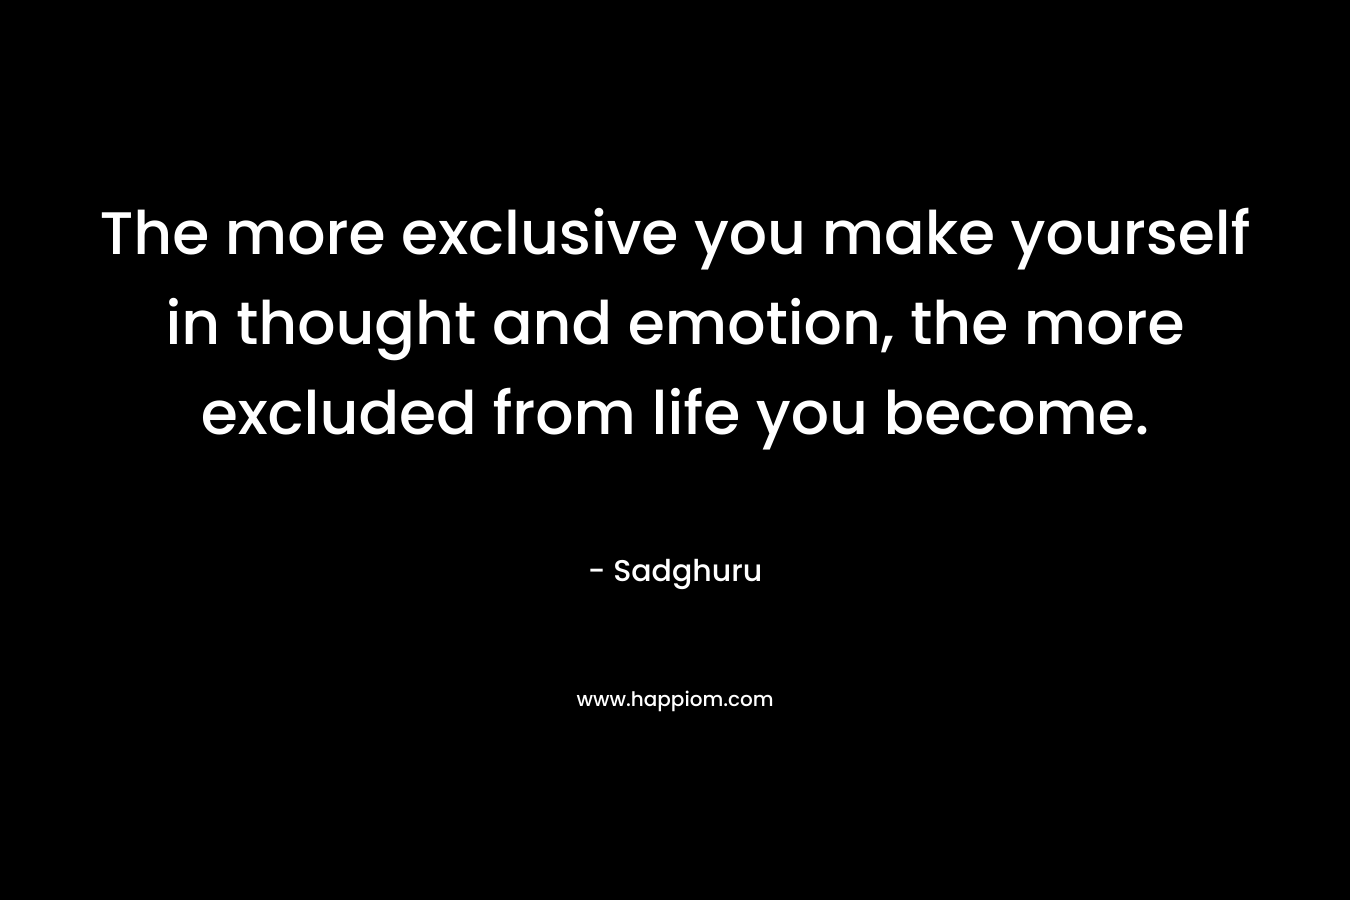 The more exclusive you make yourself in thought and emotion, the more excluded from life you become.